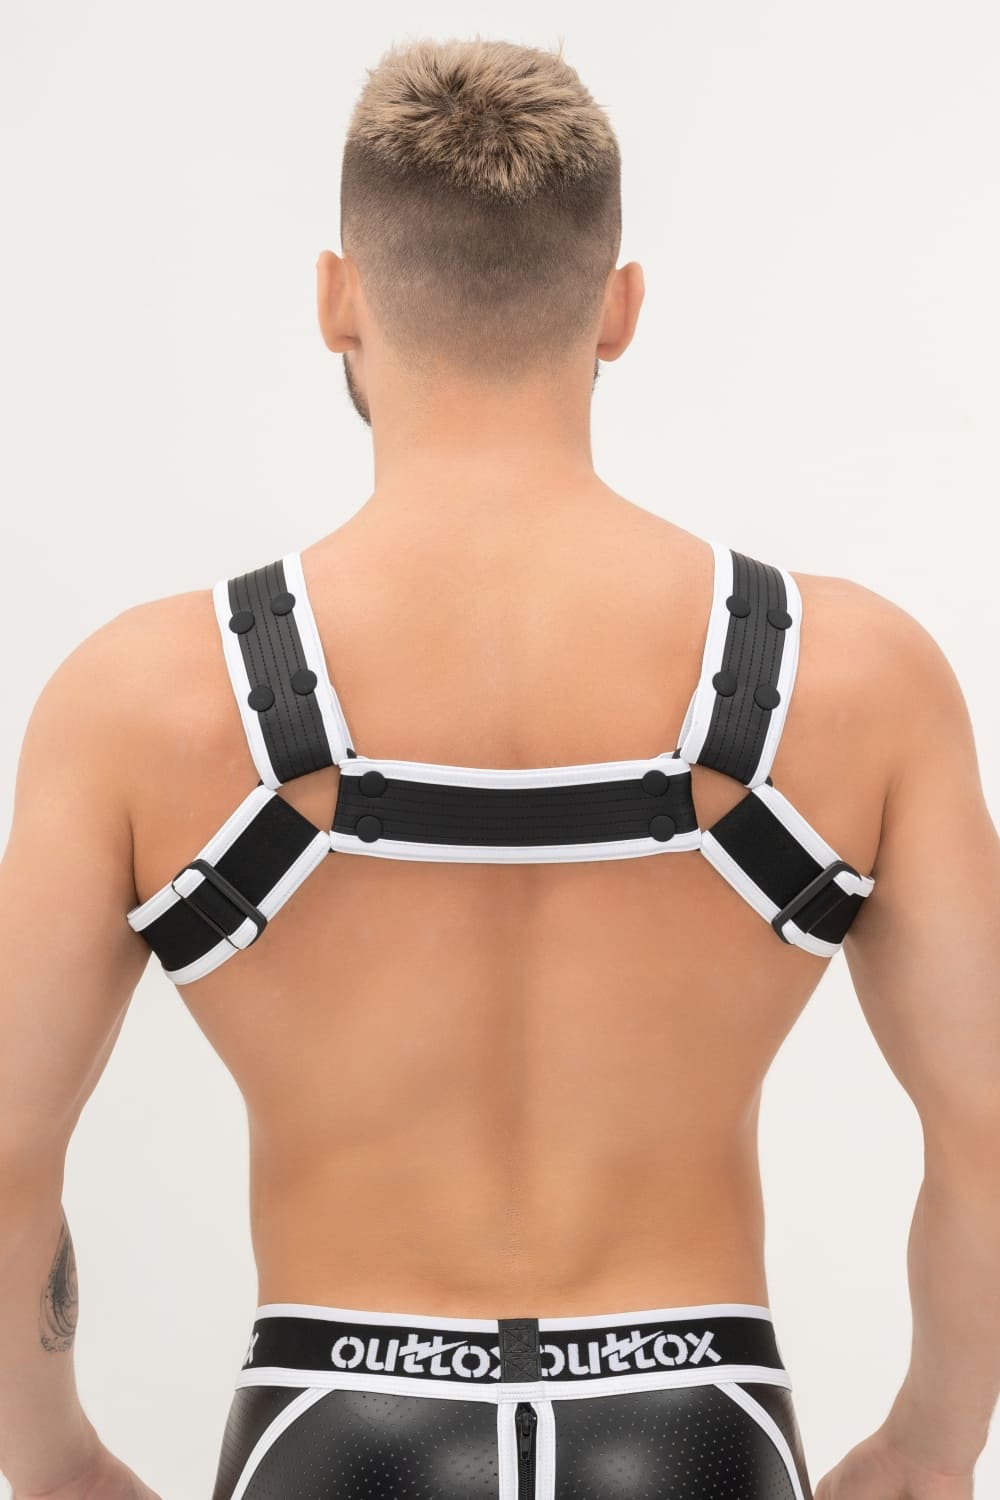 Outtox. Bulldog Harness with Snaps. Black+White